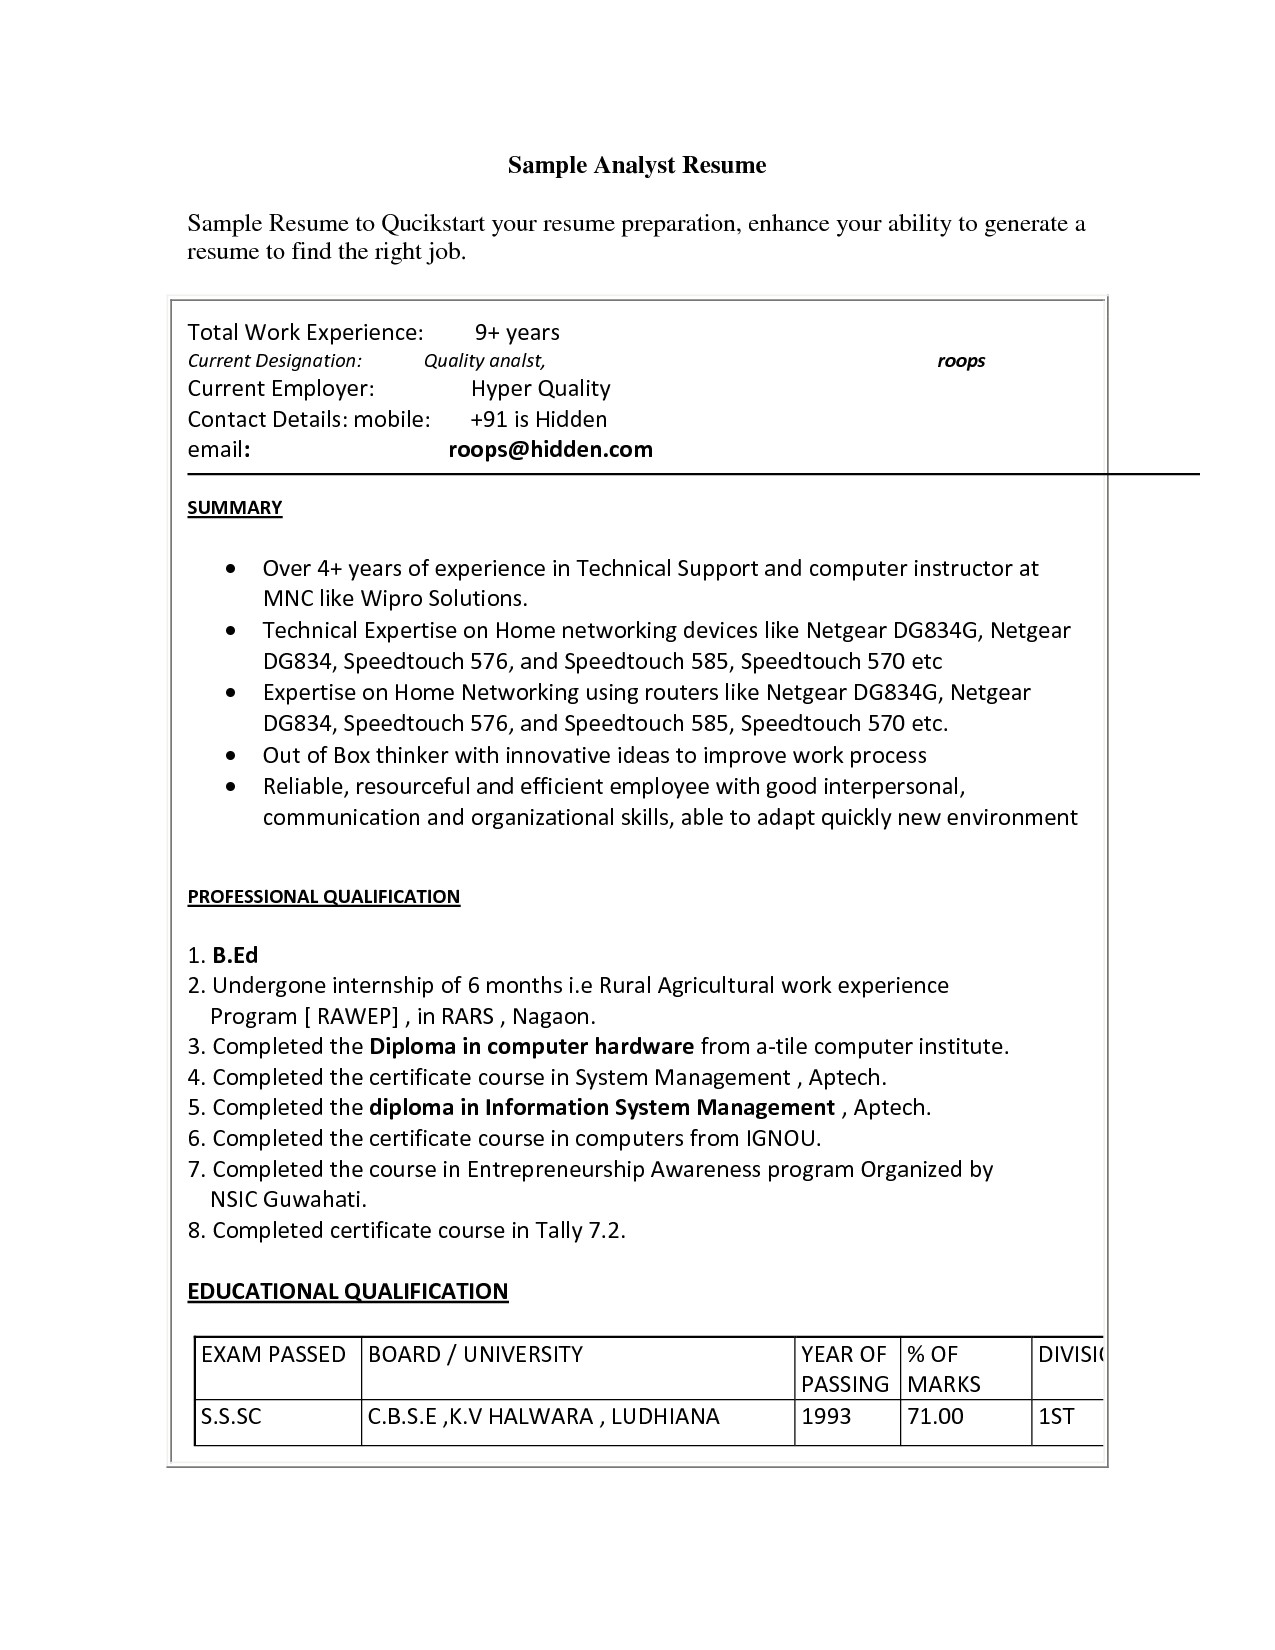 resume format for quality analyst in bpo